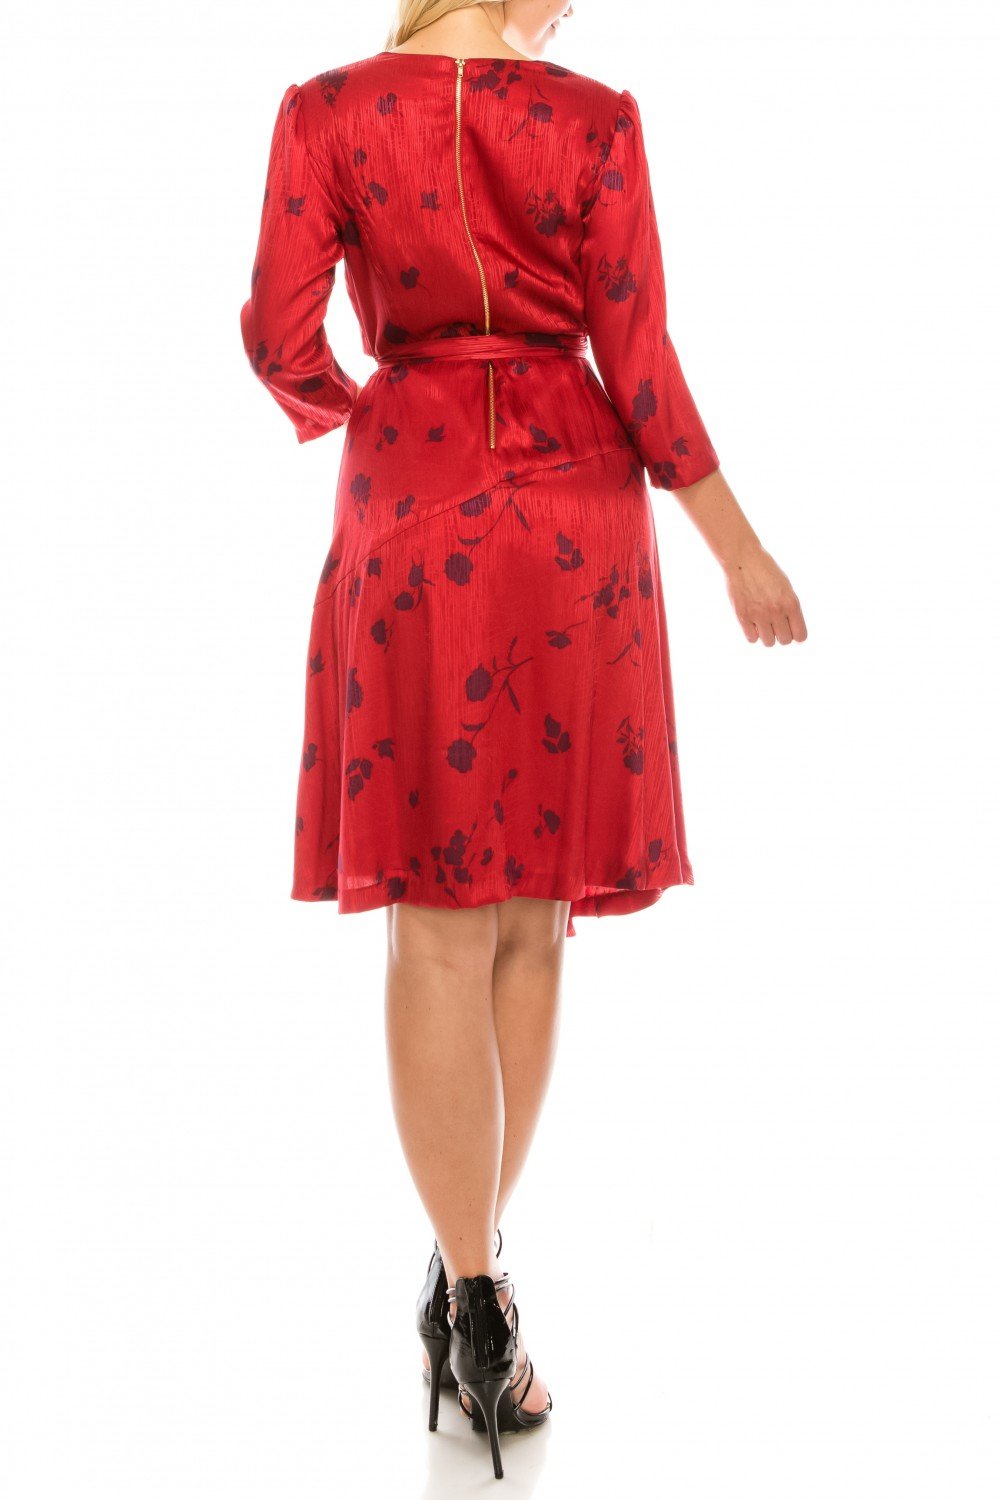 Gabby Skye - 18514M Three Quarter Sleeve Twill Faux Wrap Dress In Red and Floral